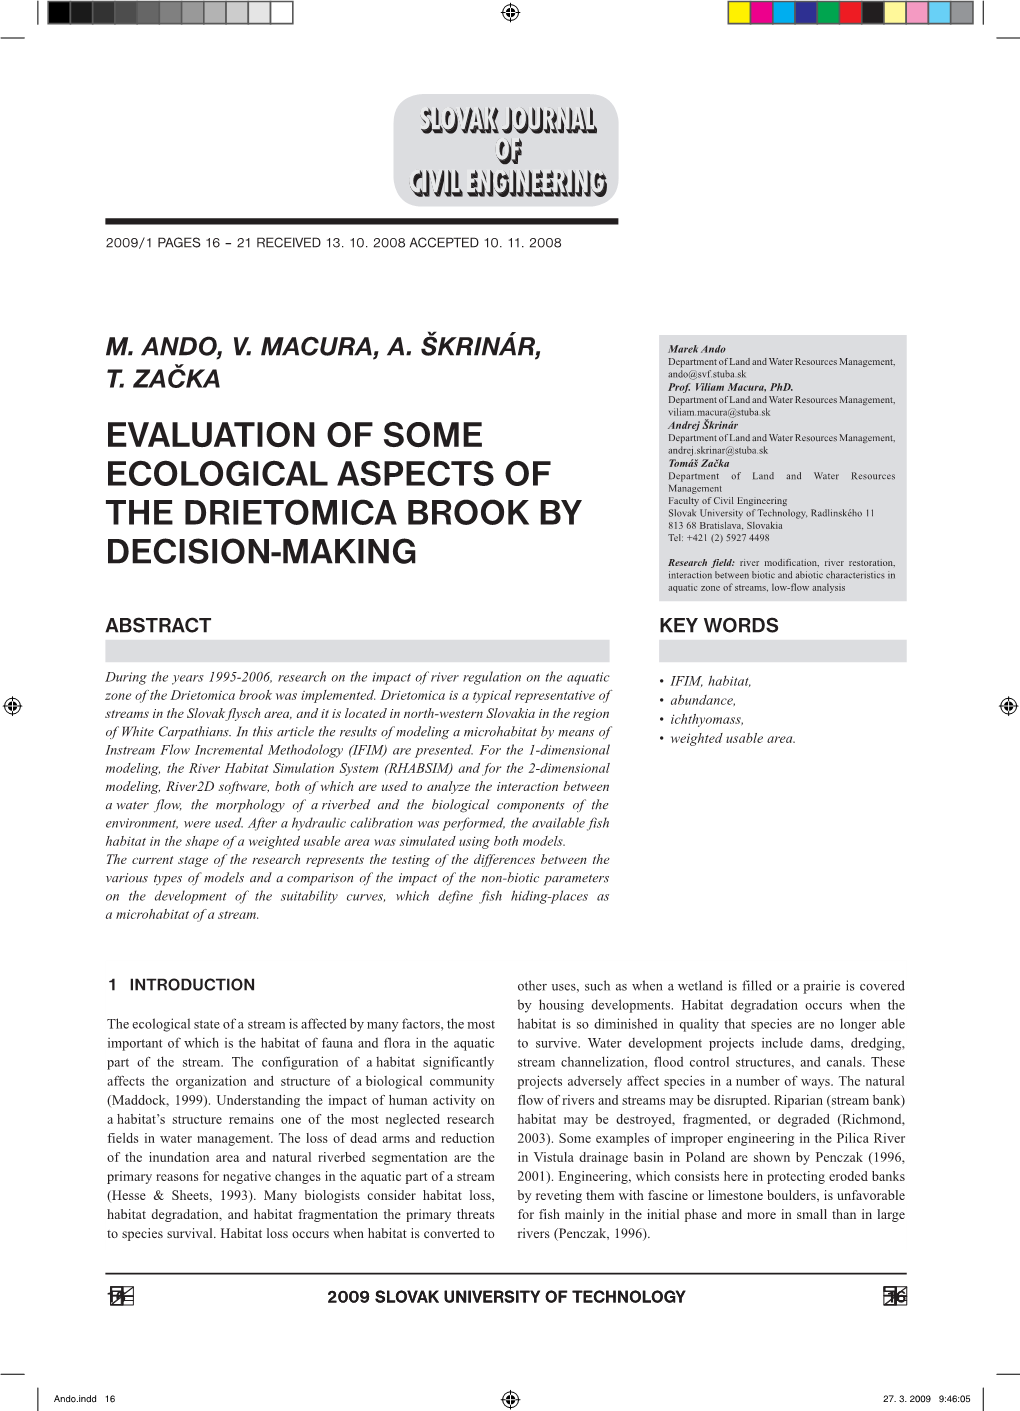 Evaluation of Some Ecological Aspects of the Drietomica Brook